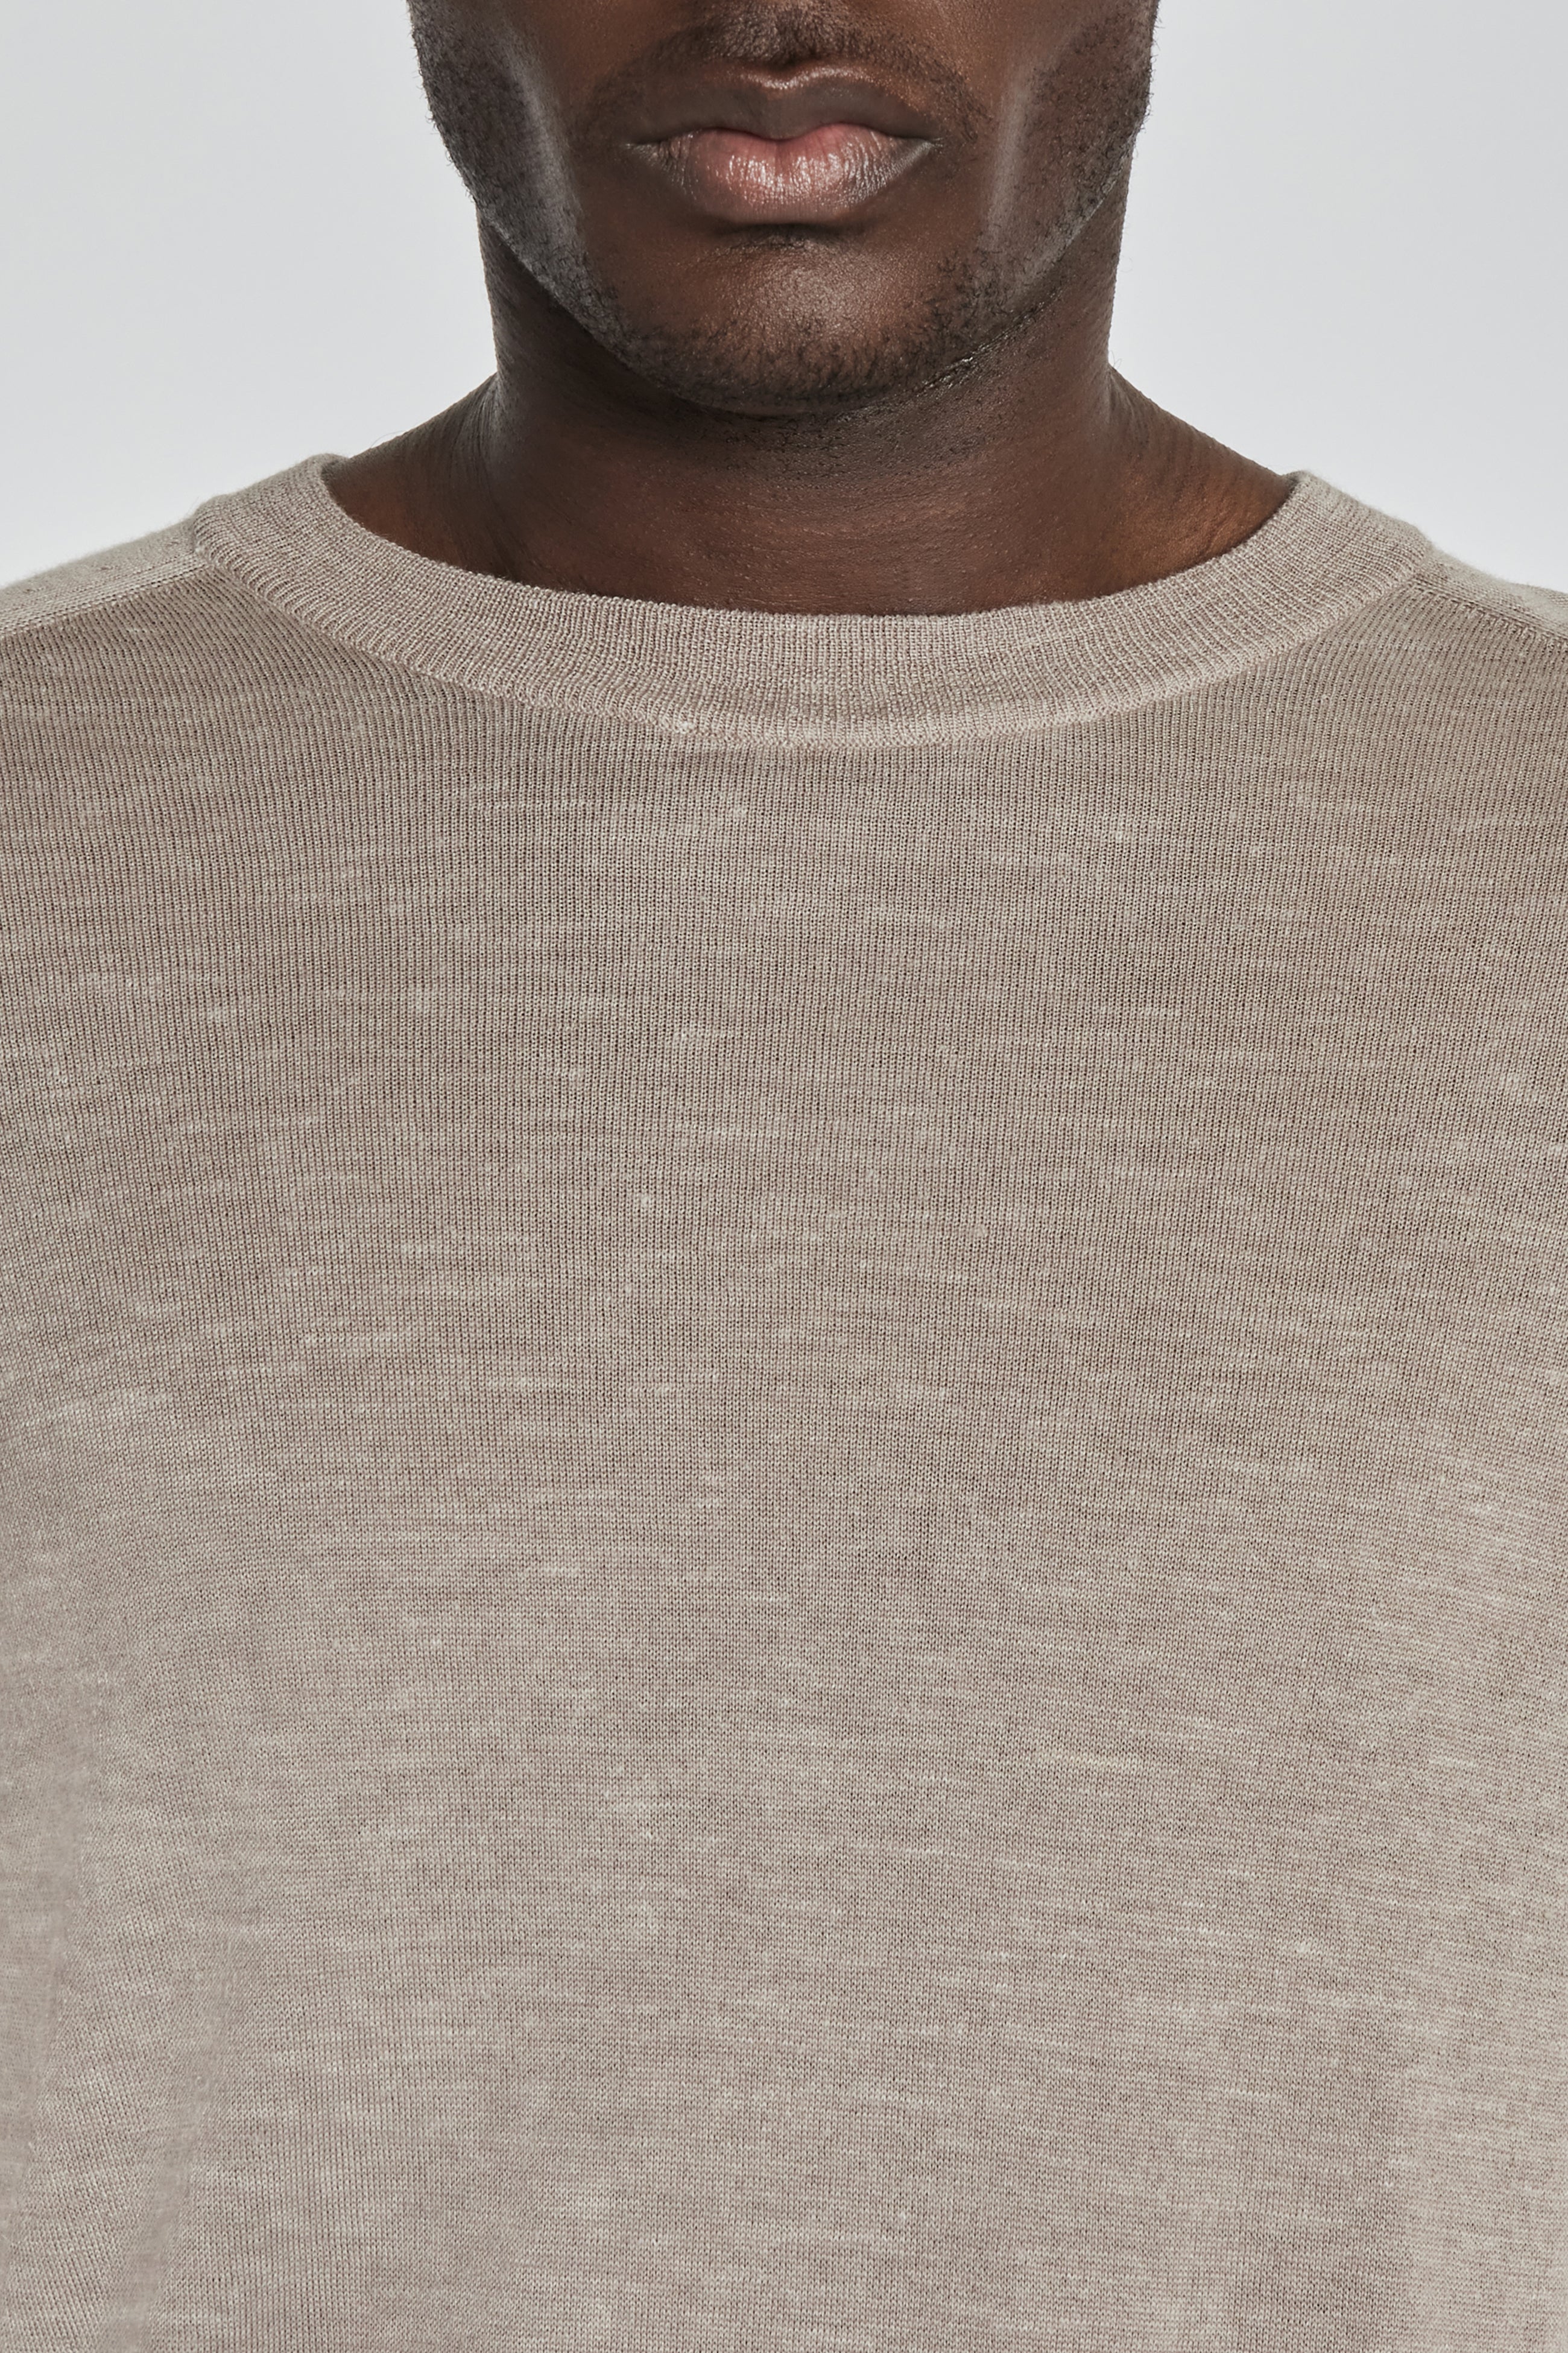 Alt view 1 Bailey Solid Merino Wool, Silk and Linen Long Sleeve Crew in Tan